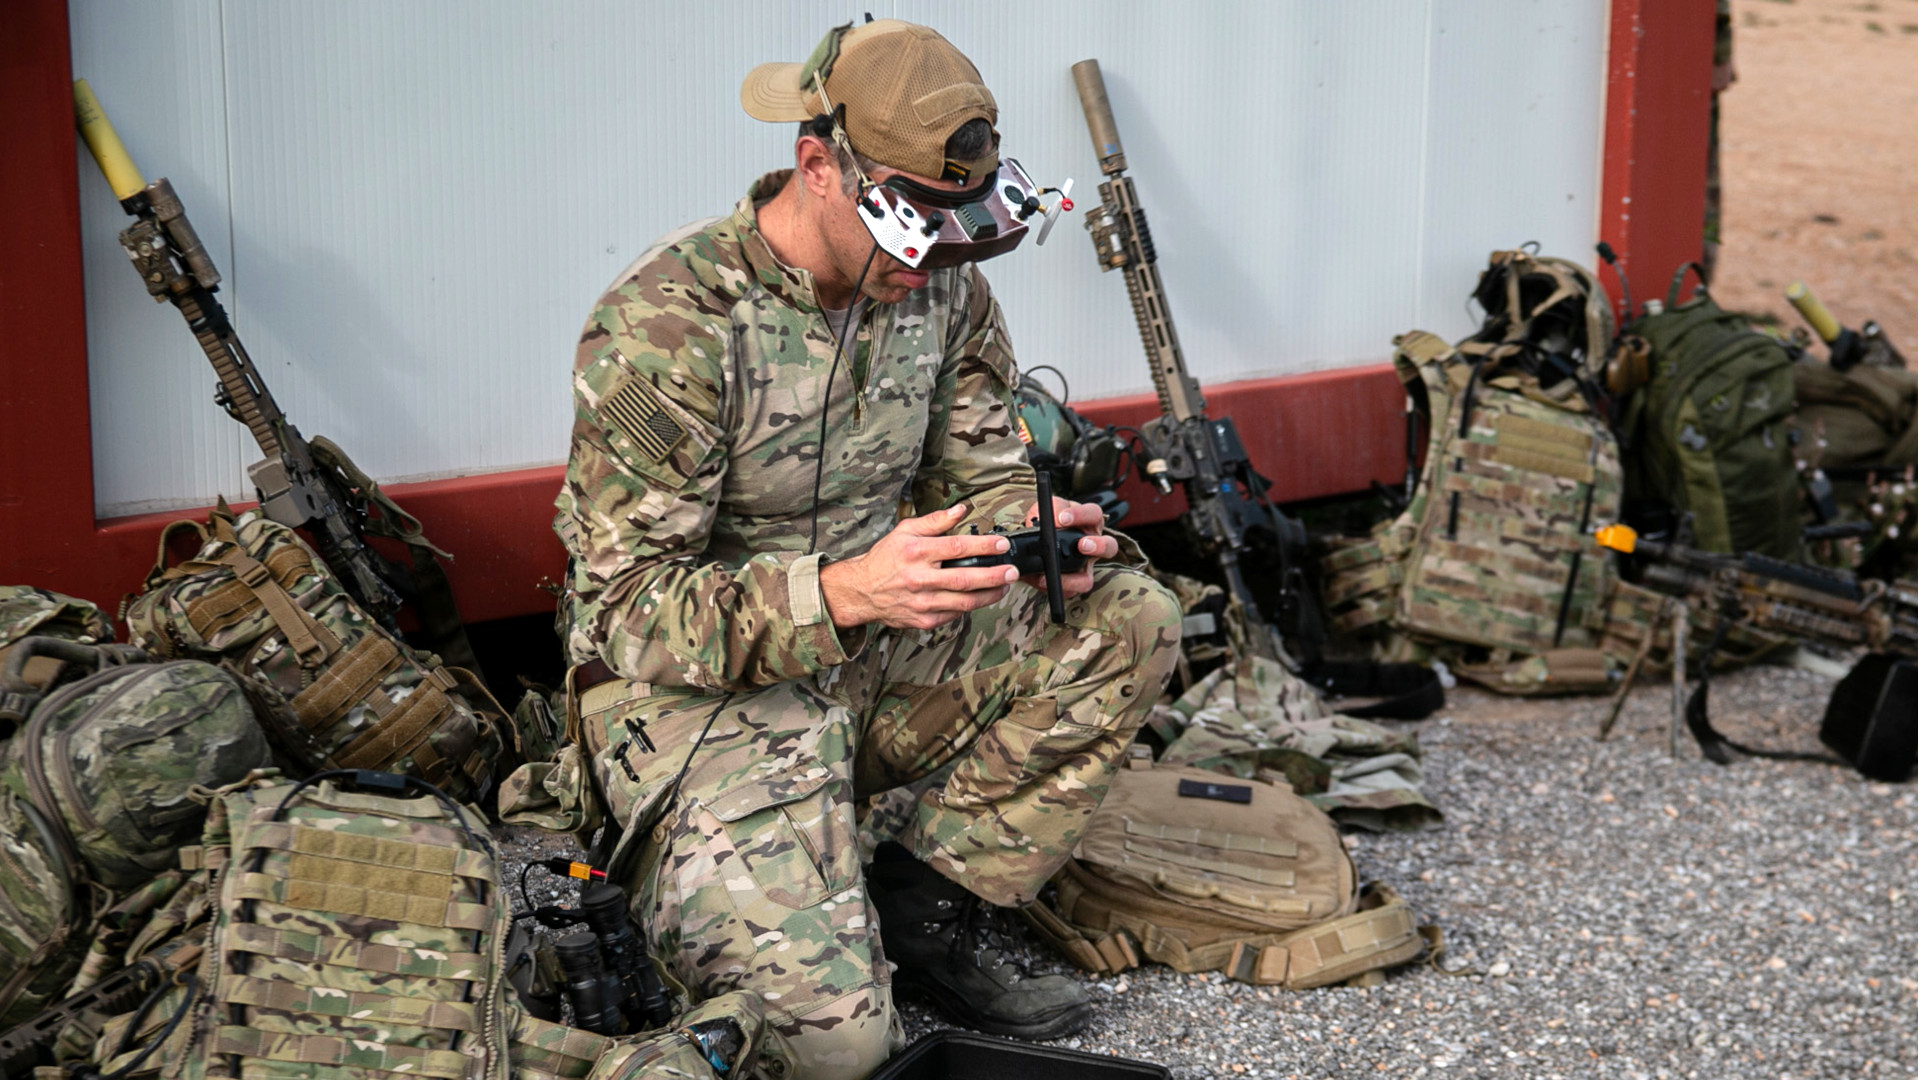 US Army Green Berets are getting specialized drone training ahead of a rotational deployment that could include temporary training stint in Ukraine.